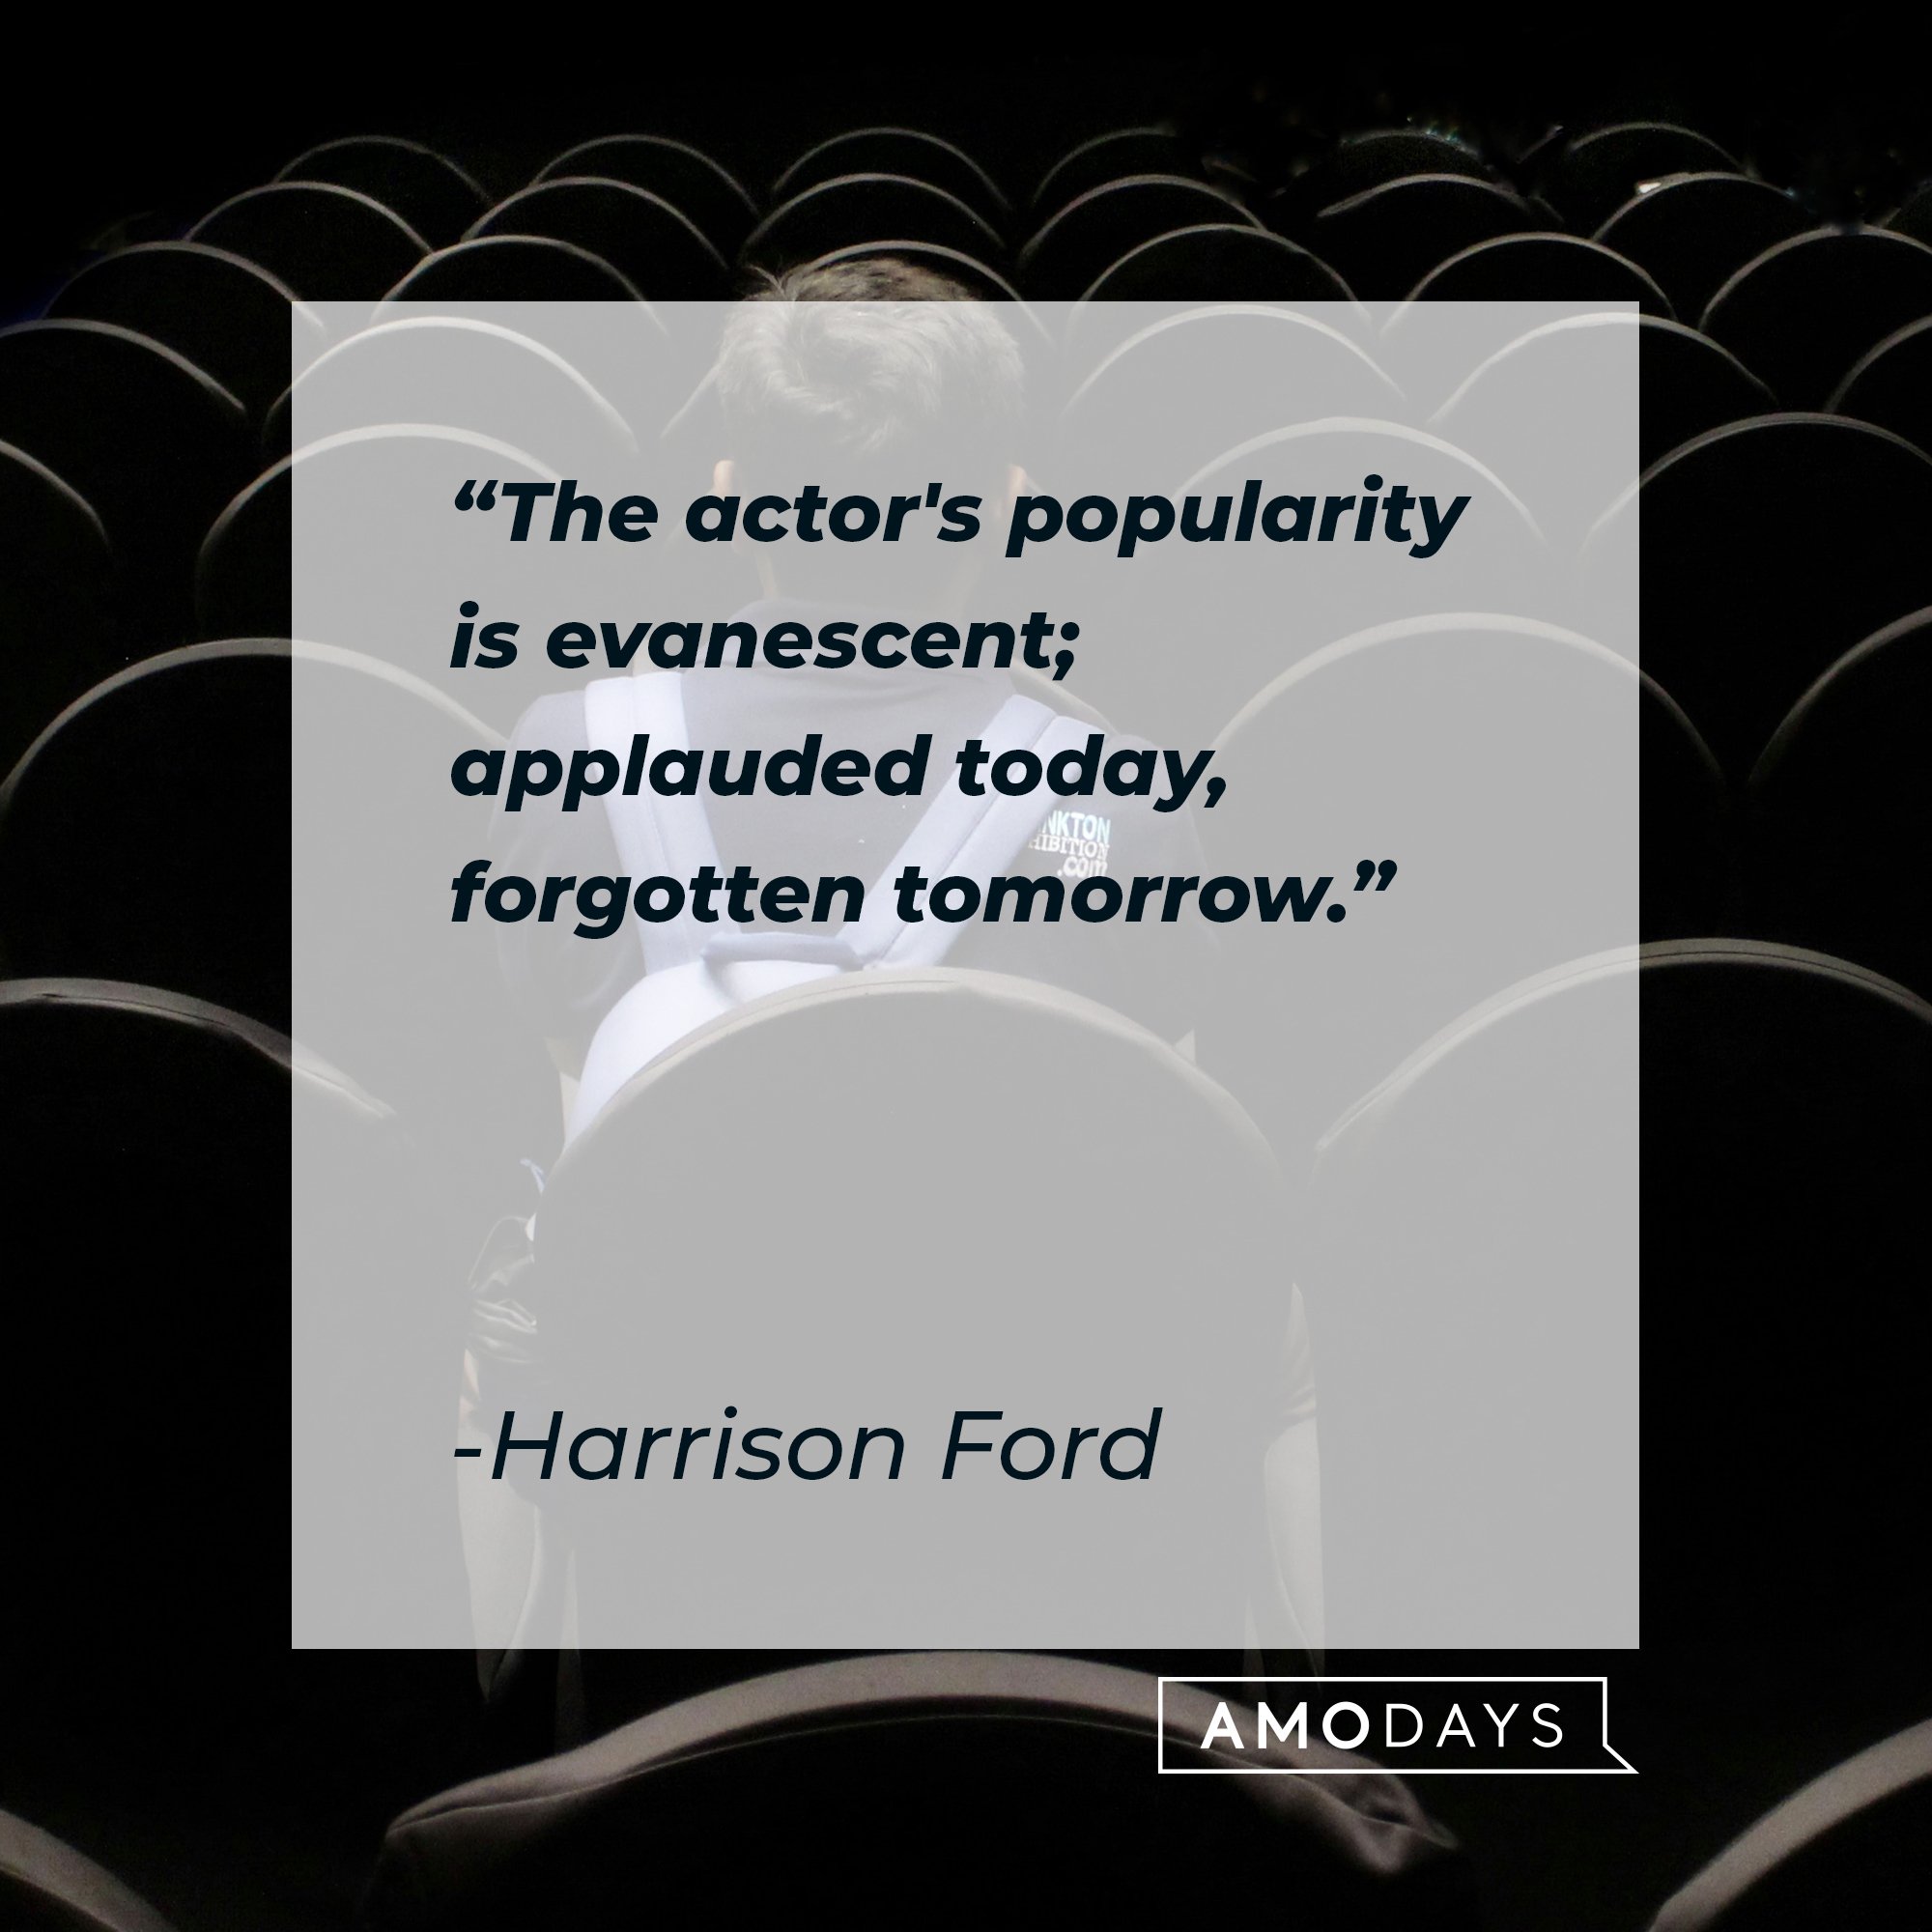 Harrison Ford’s quote: "The actor's popularity is evanescent; applauded today, forgotten tomorrow." | Image: AmoDays